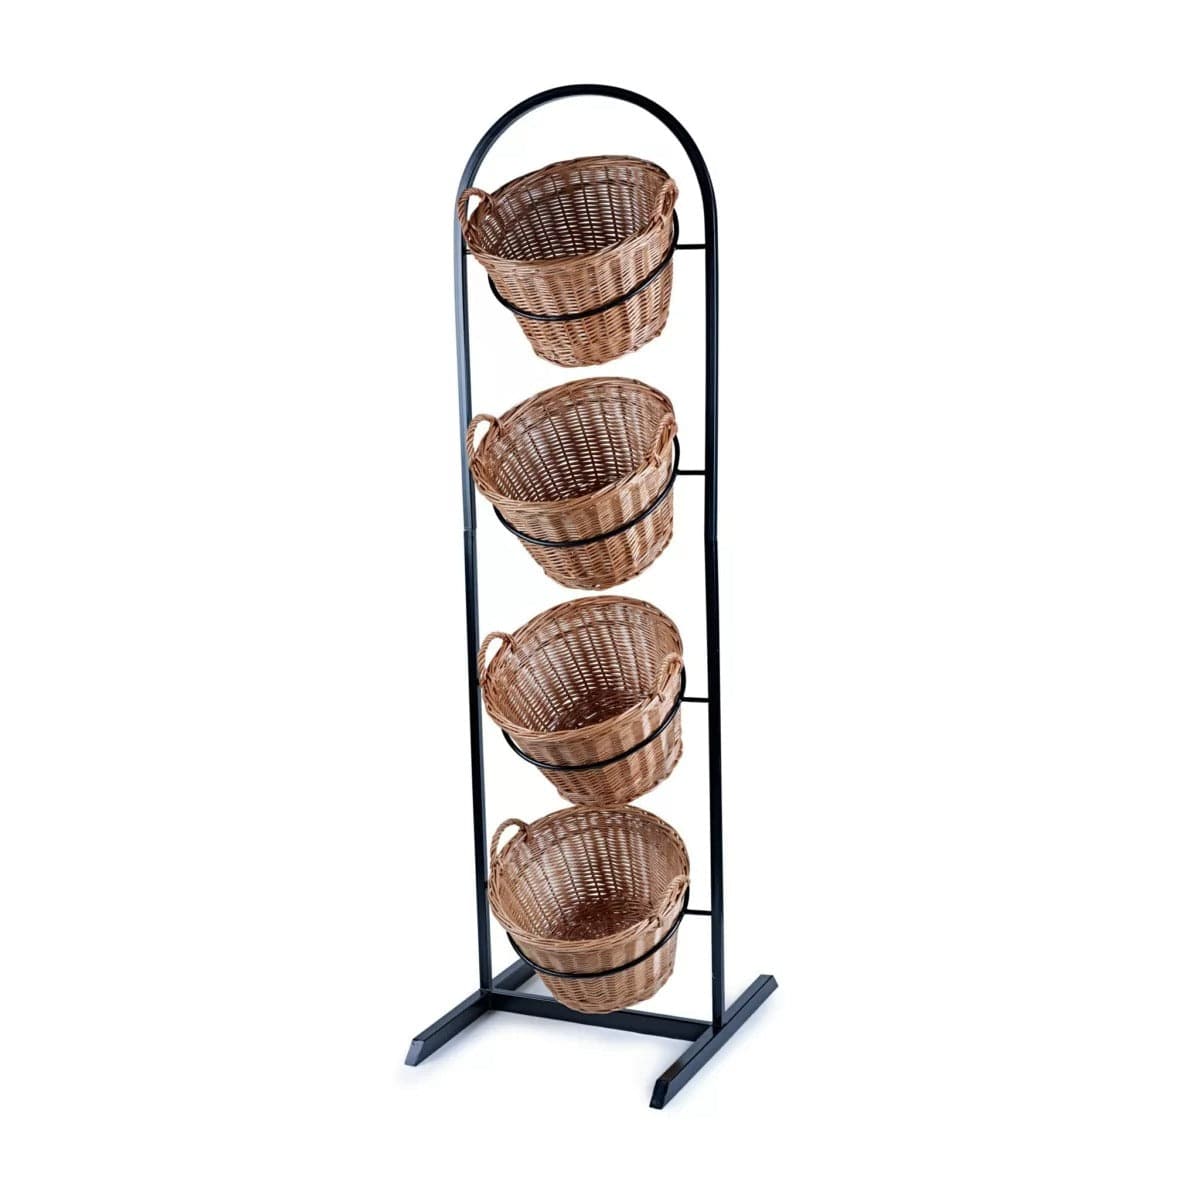 4 Tier Metal Display Stand With Baskets